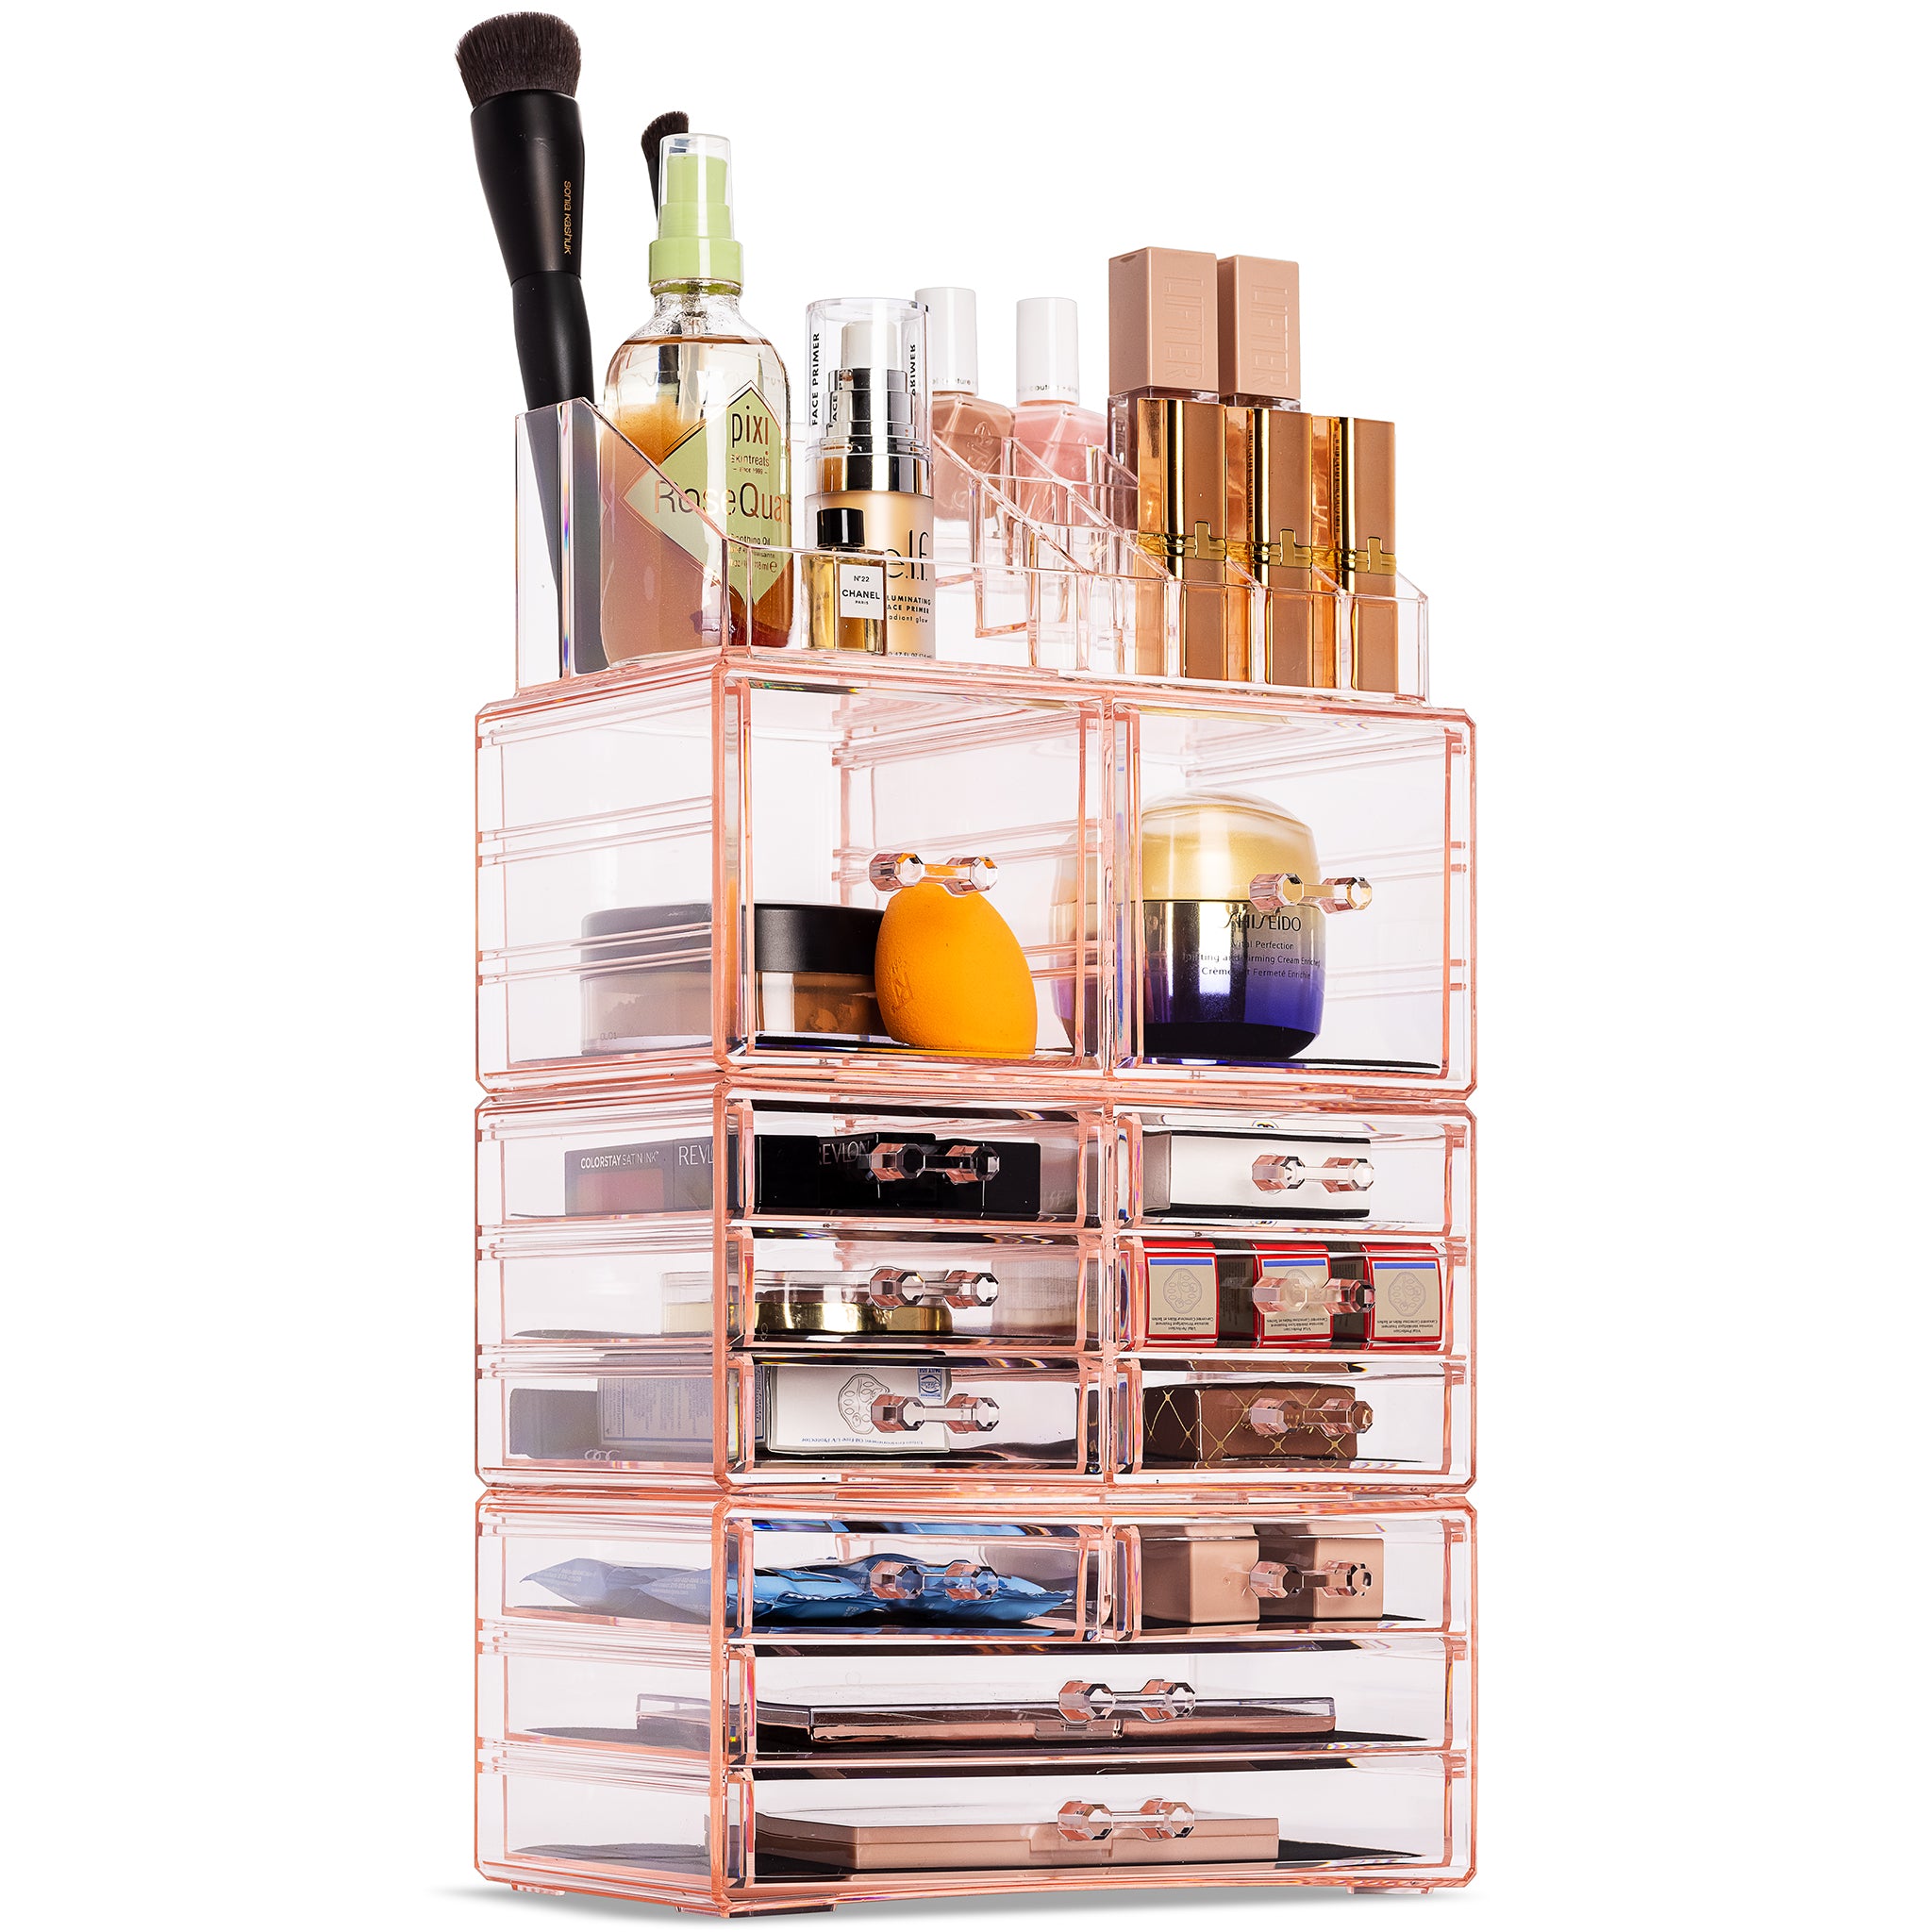 Cosmetics Makeup Organizer Storage:Detach Make Up Organizers and Storage  with Clear Drawers Large Skincare Organizers for Vanity Countertop Dresser  Bedroom Bathroom Desk 